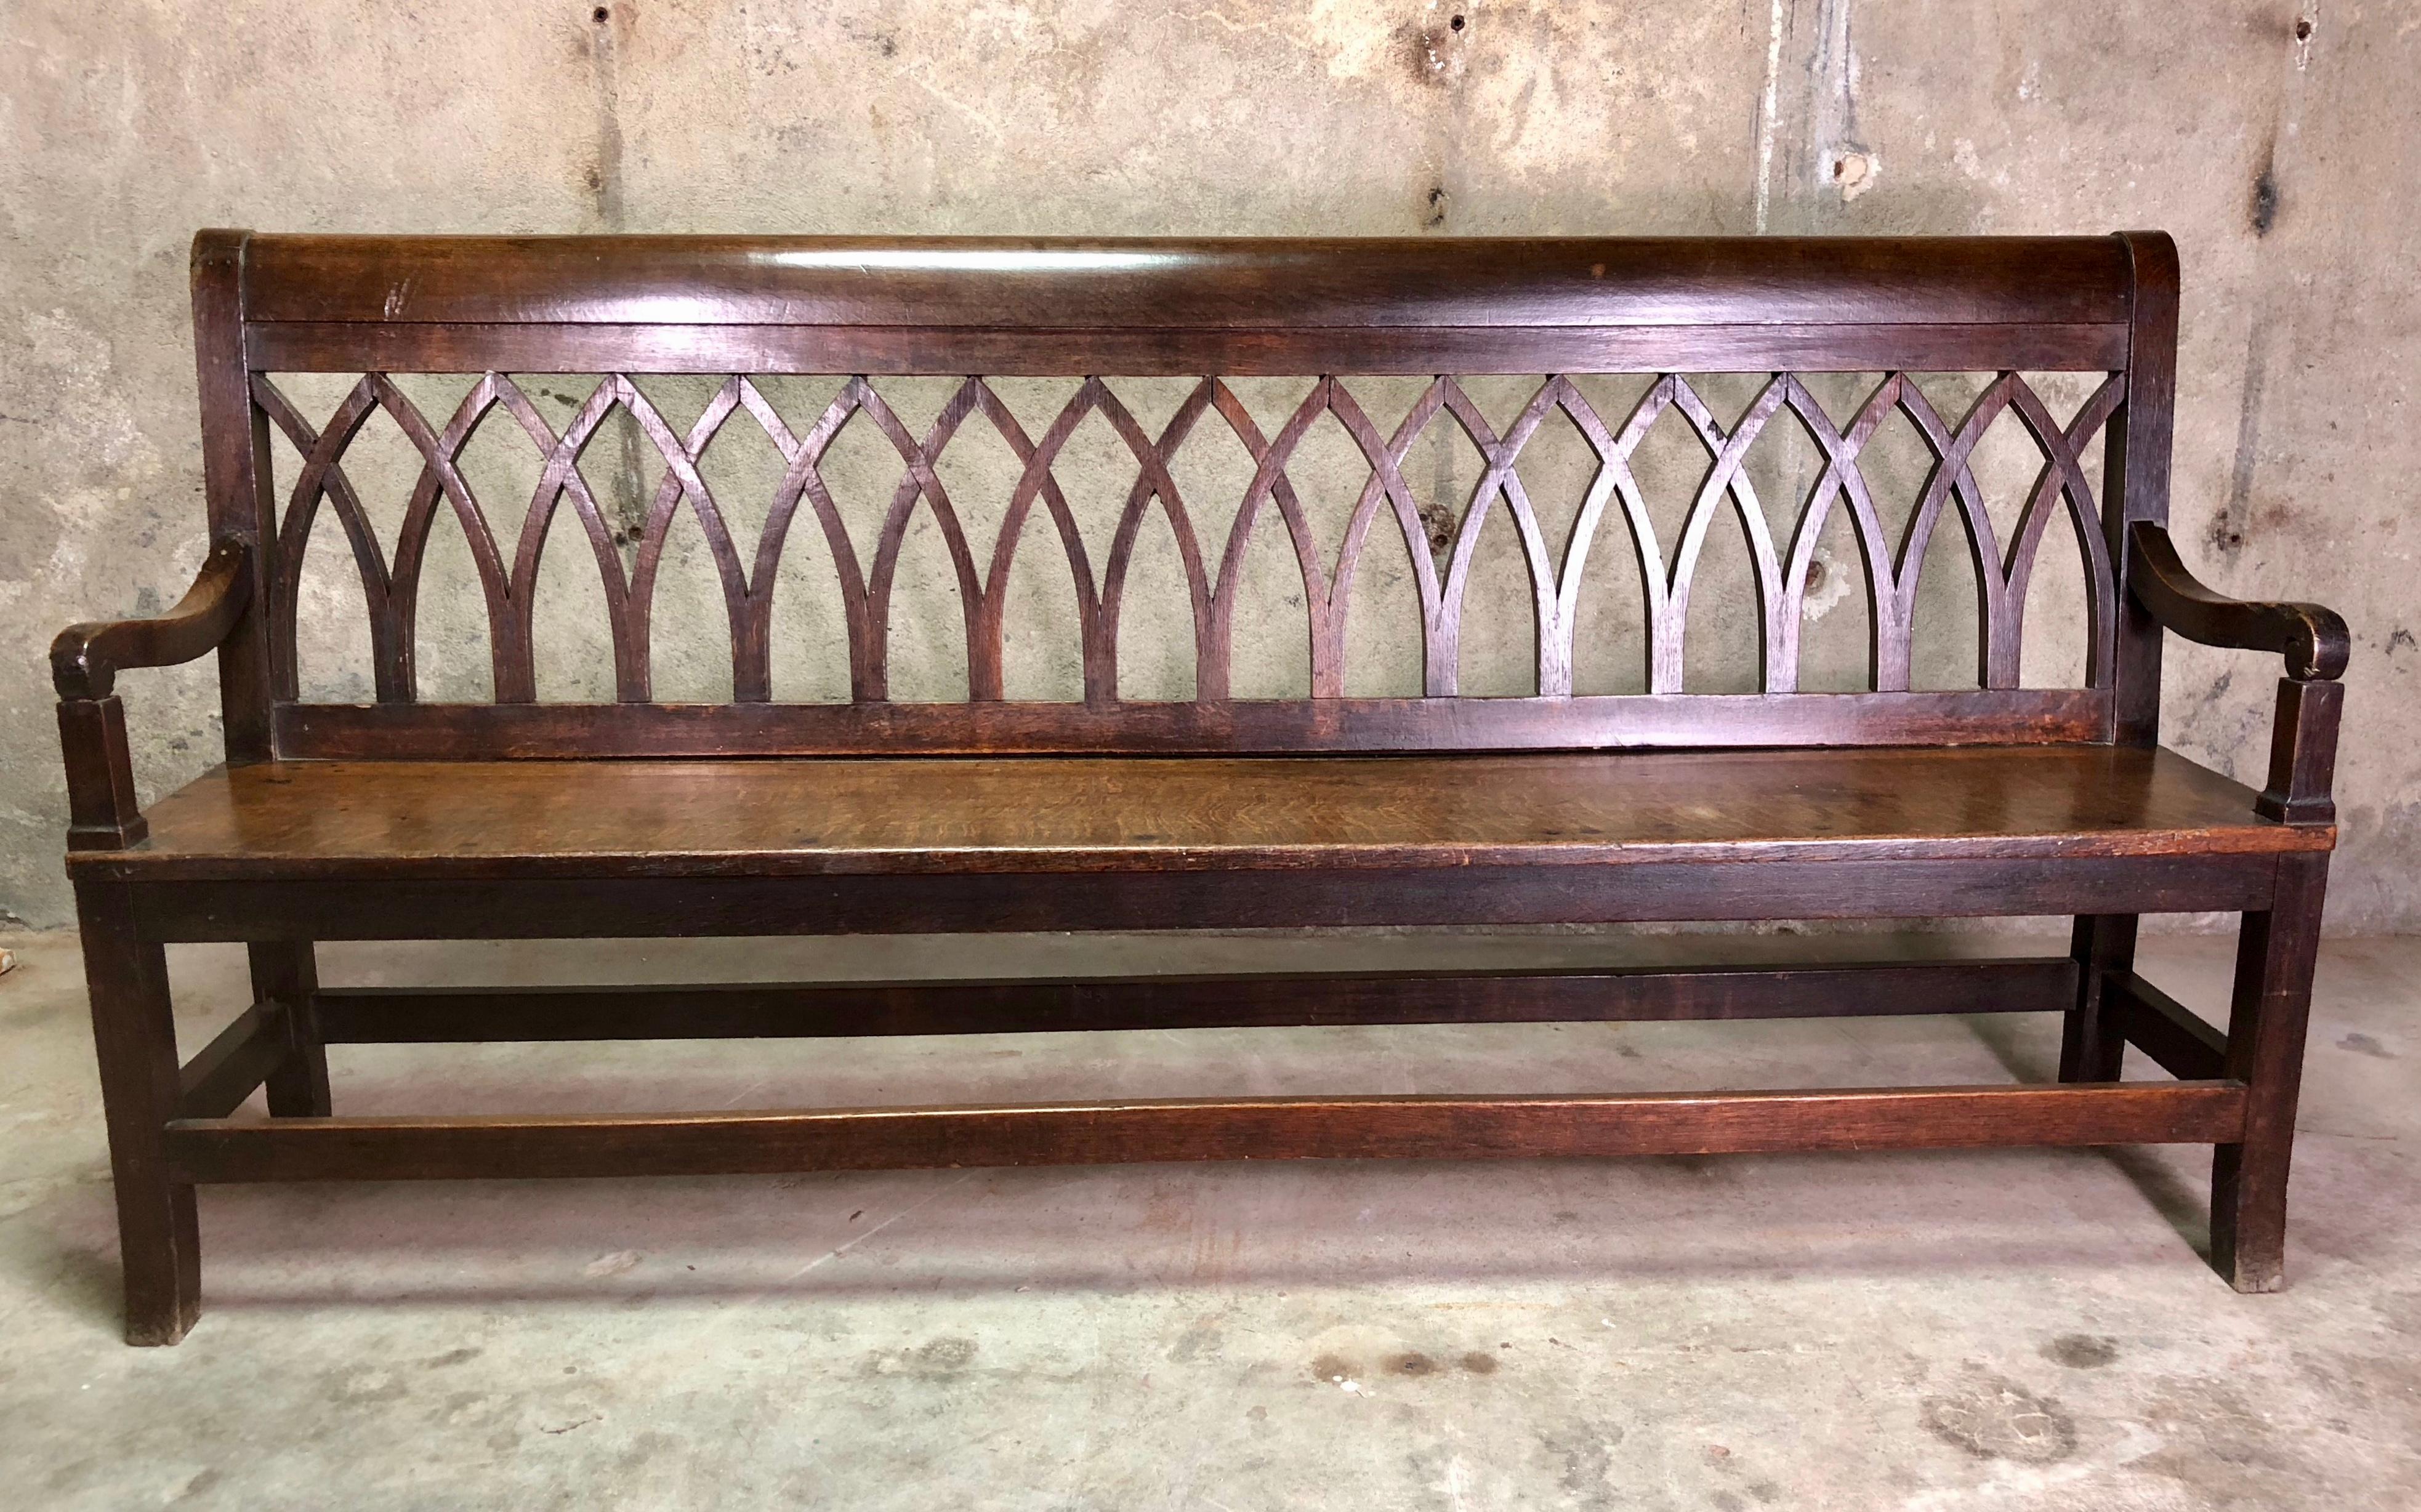 A beautiful long bench in tiger oak.
The back is an elegant series of gothic fenestrations.
At the back of the top of each arch there is a forged iron support.
Dating back to the late 19th century it is in lovely condition and has developed a